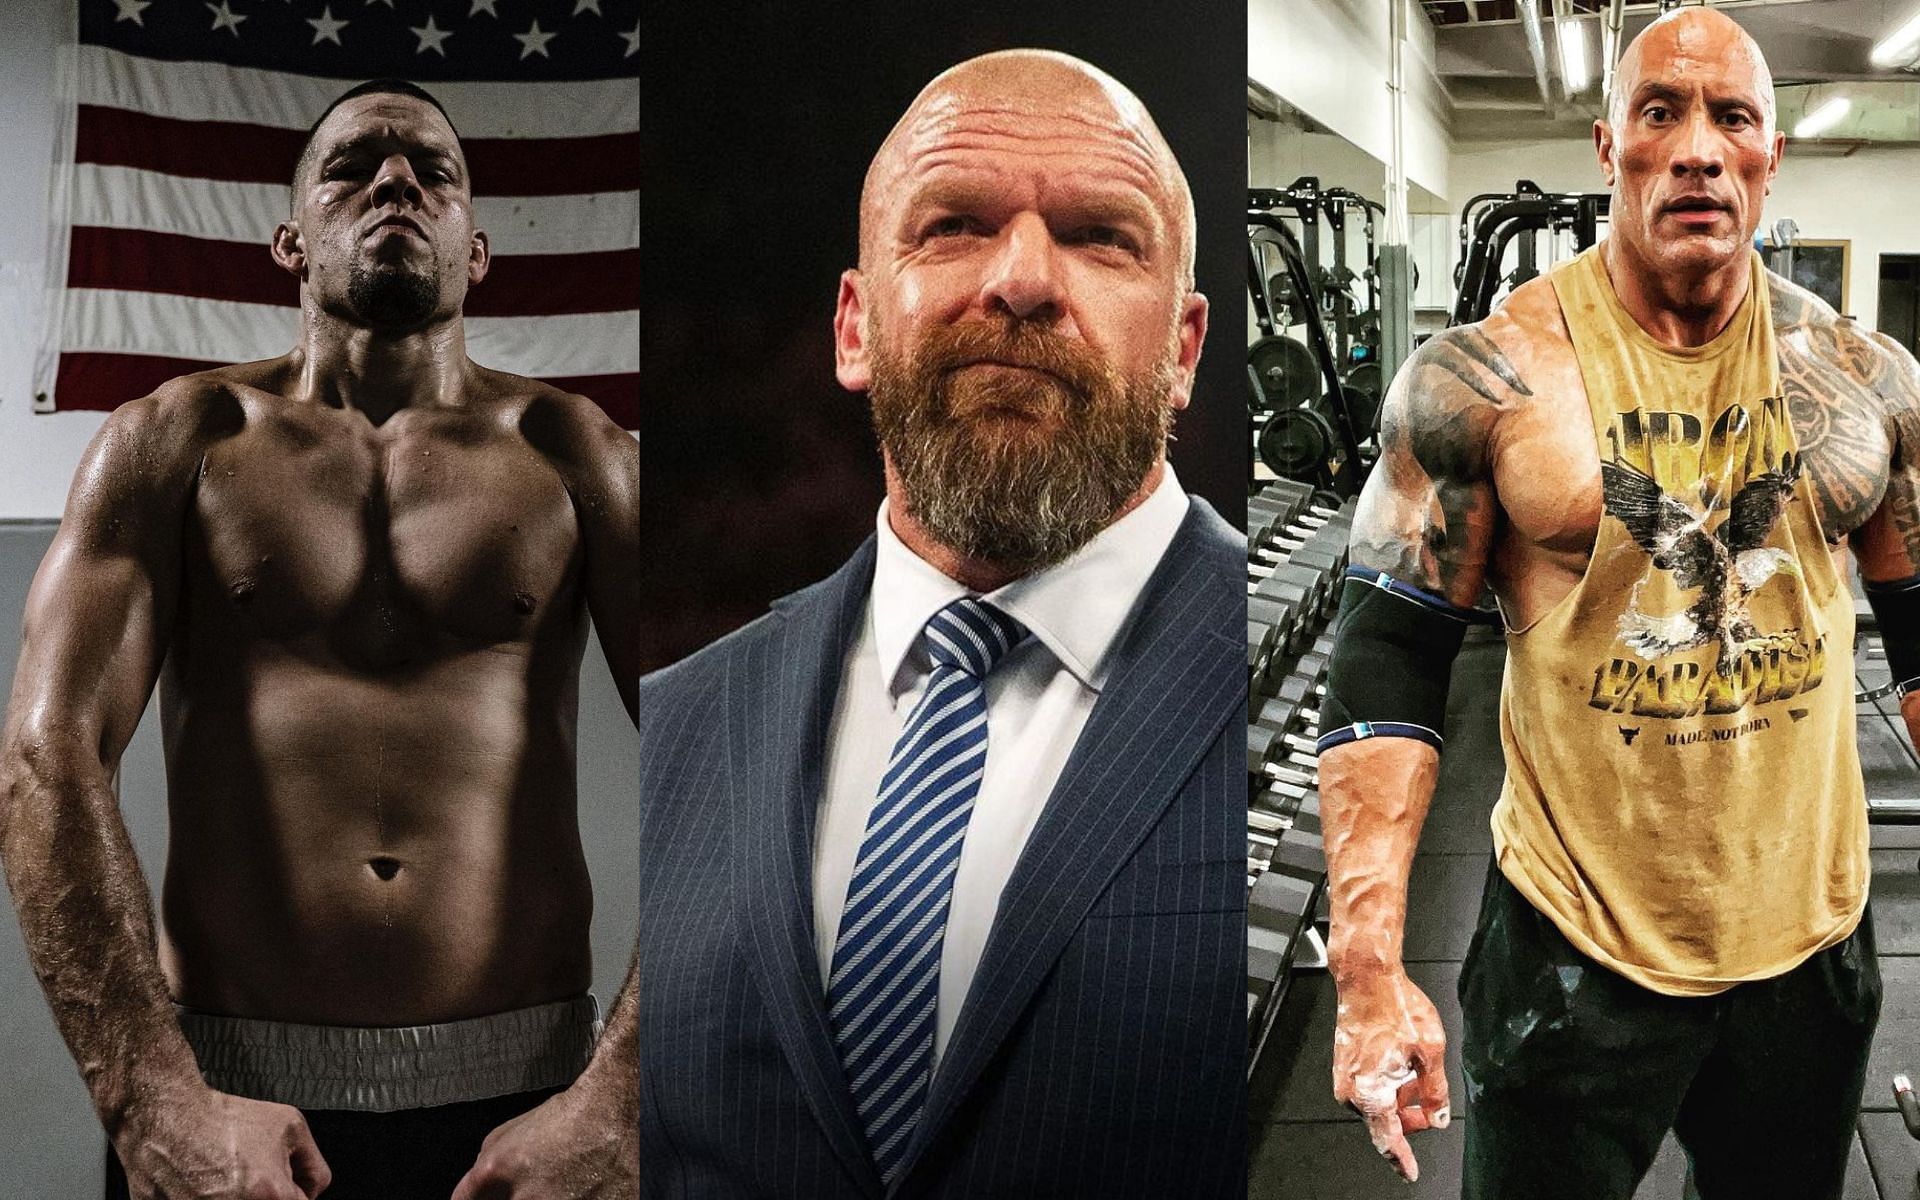 Nate Diaz (Left), Triple-H (Center), and The Rock (Right) [Images via @natediaz209 @tripleh and @therock on Instagram]